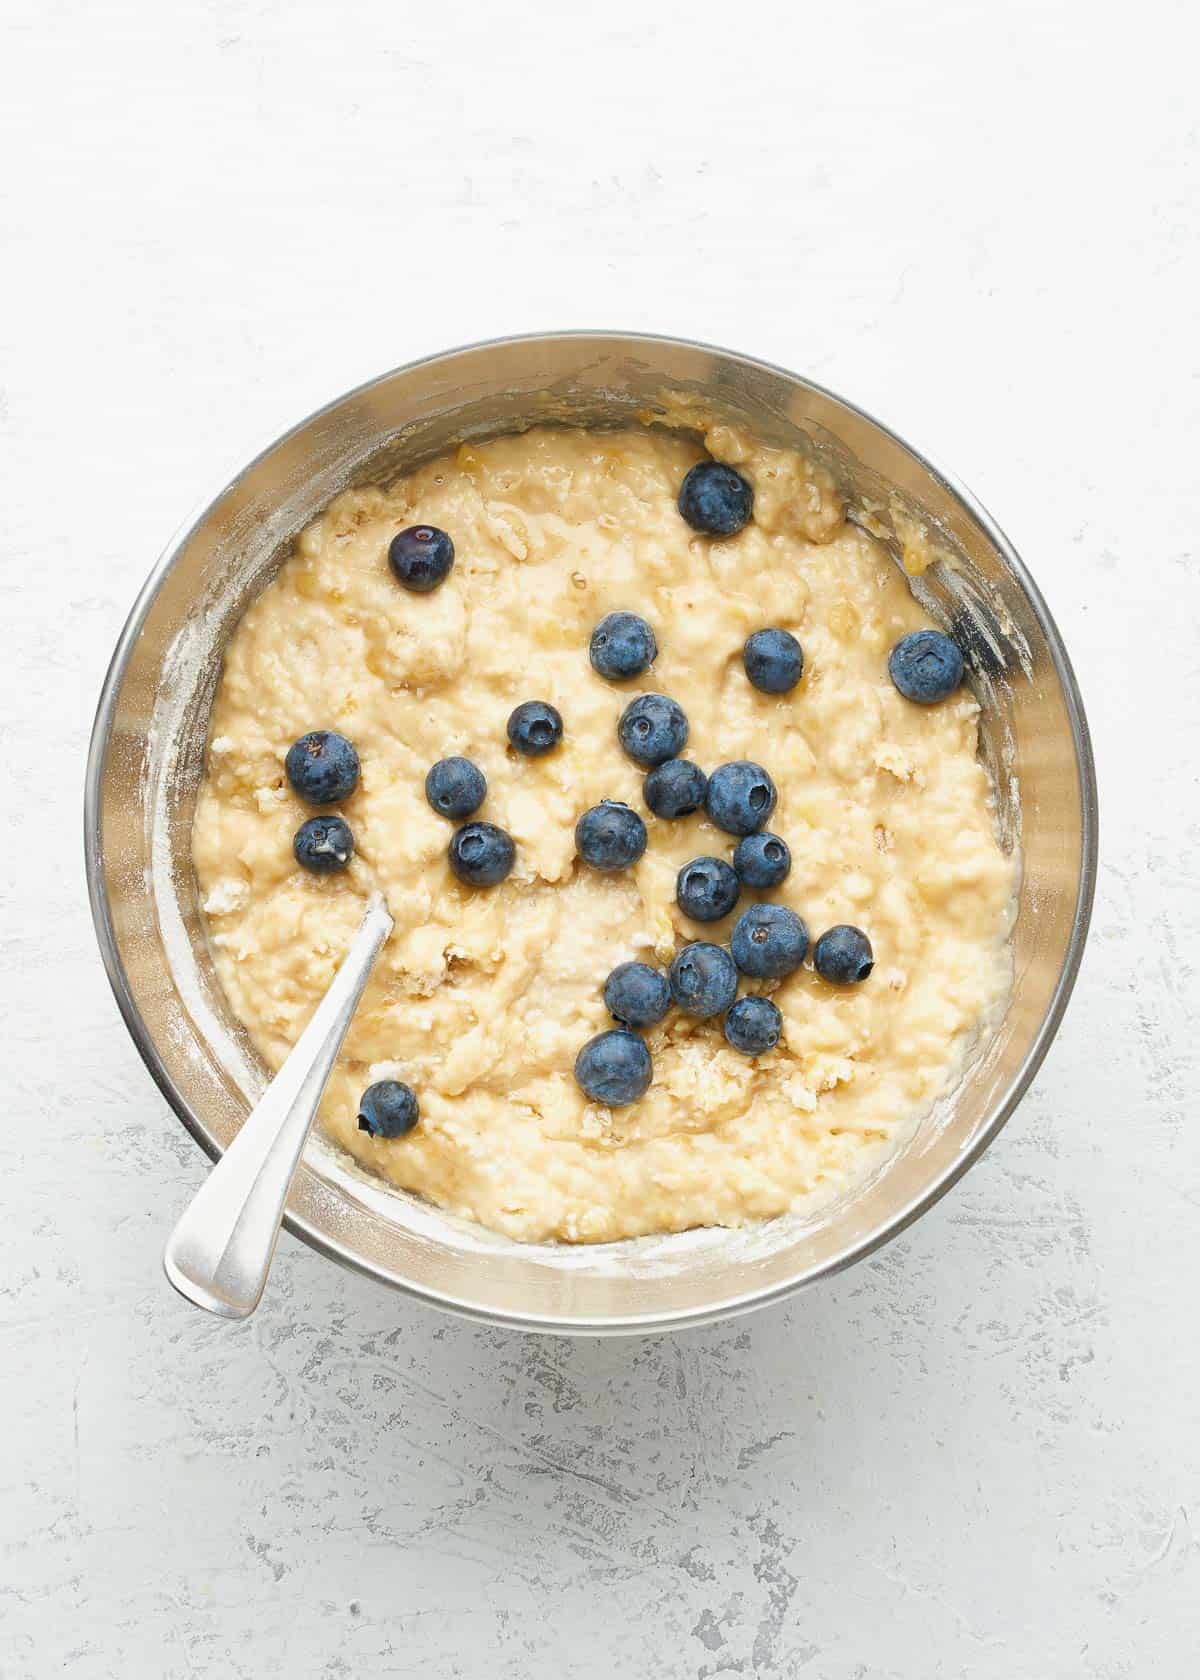 A mixing bowl full of banana bread batter with blueberries on top.